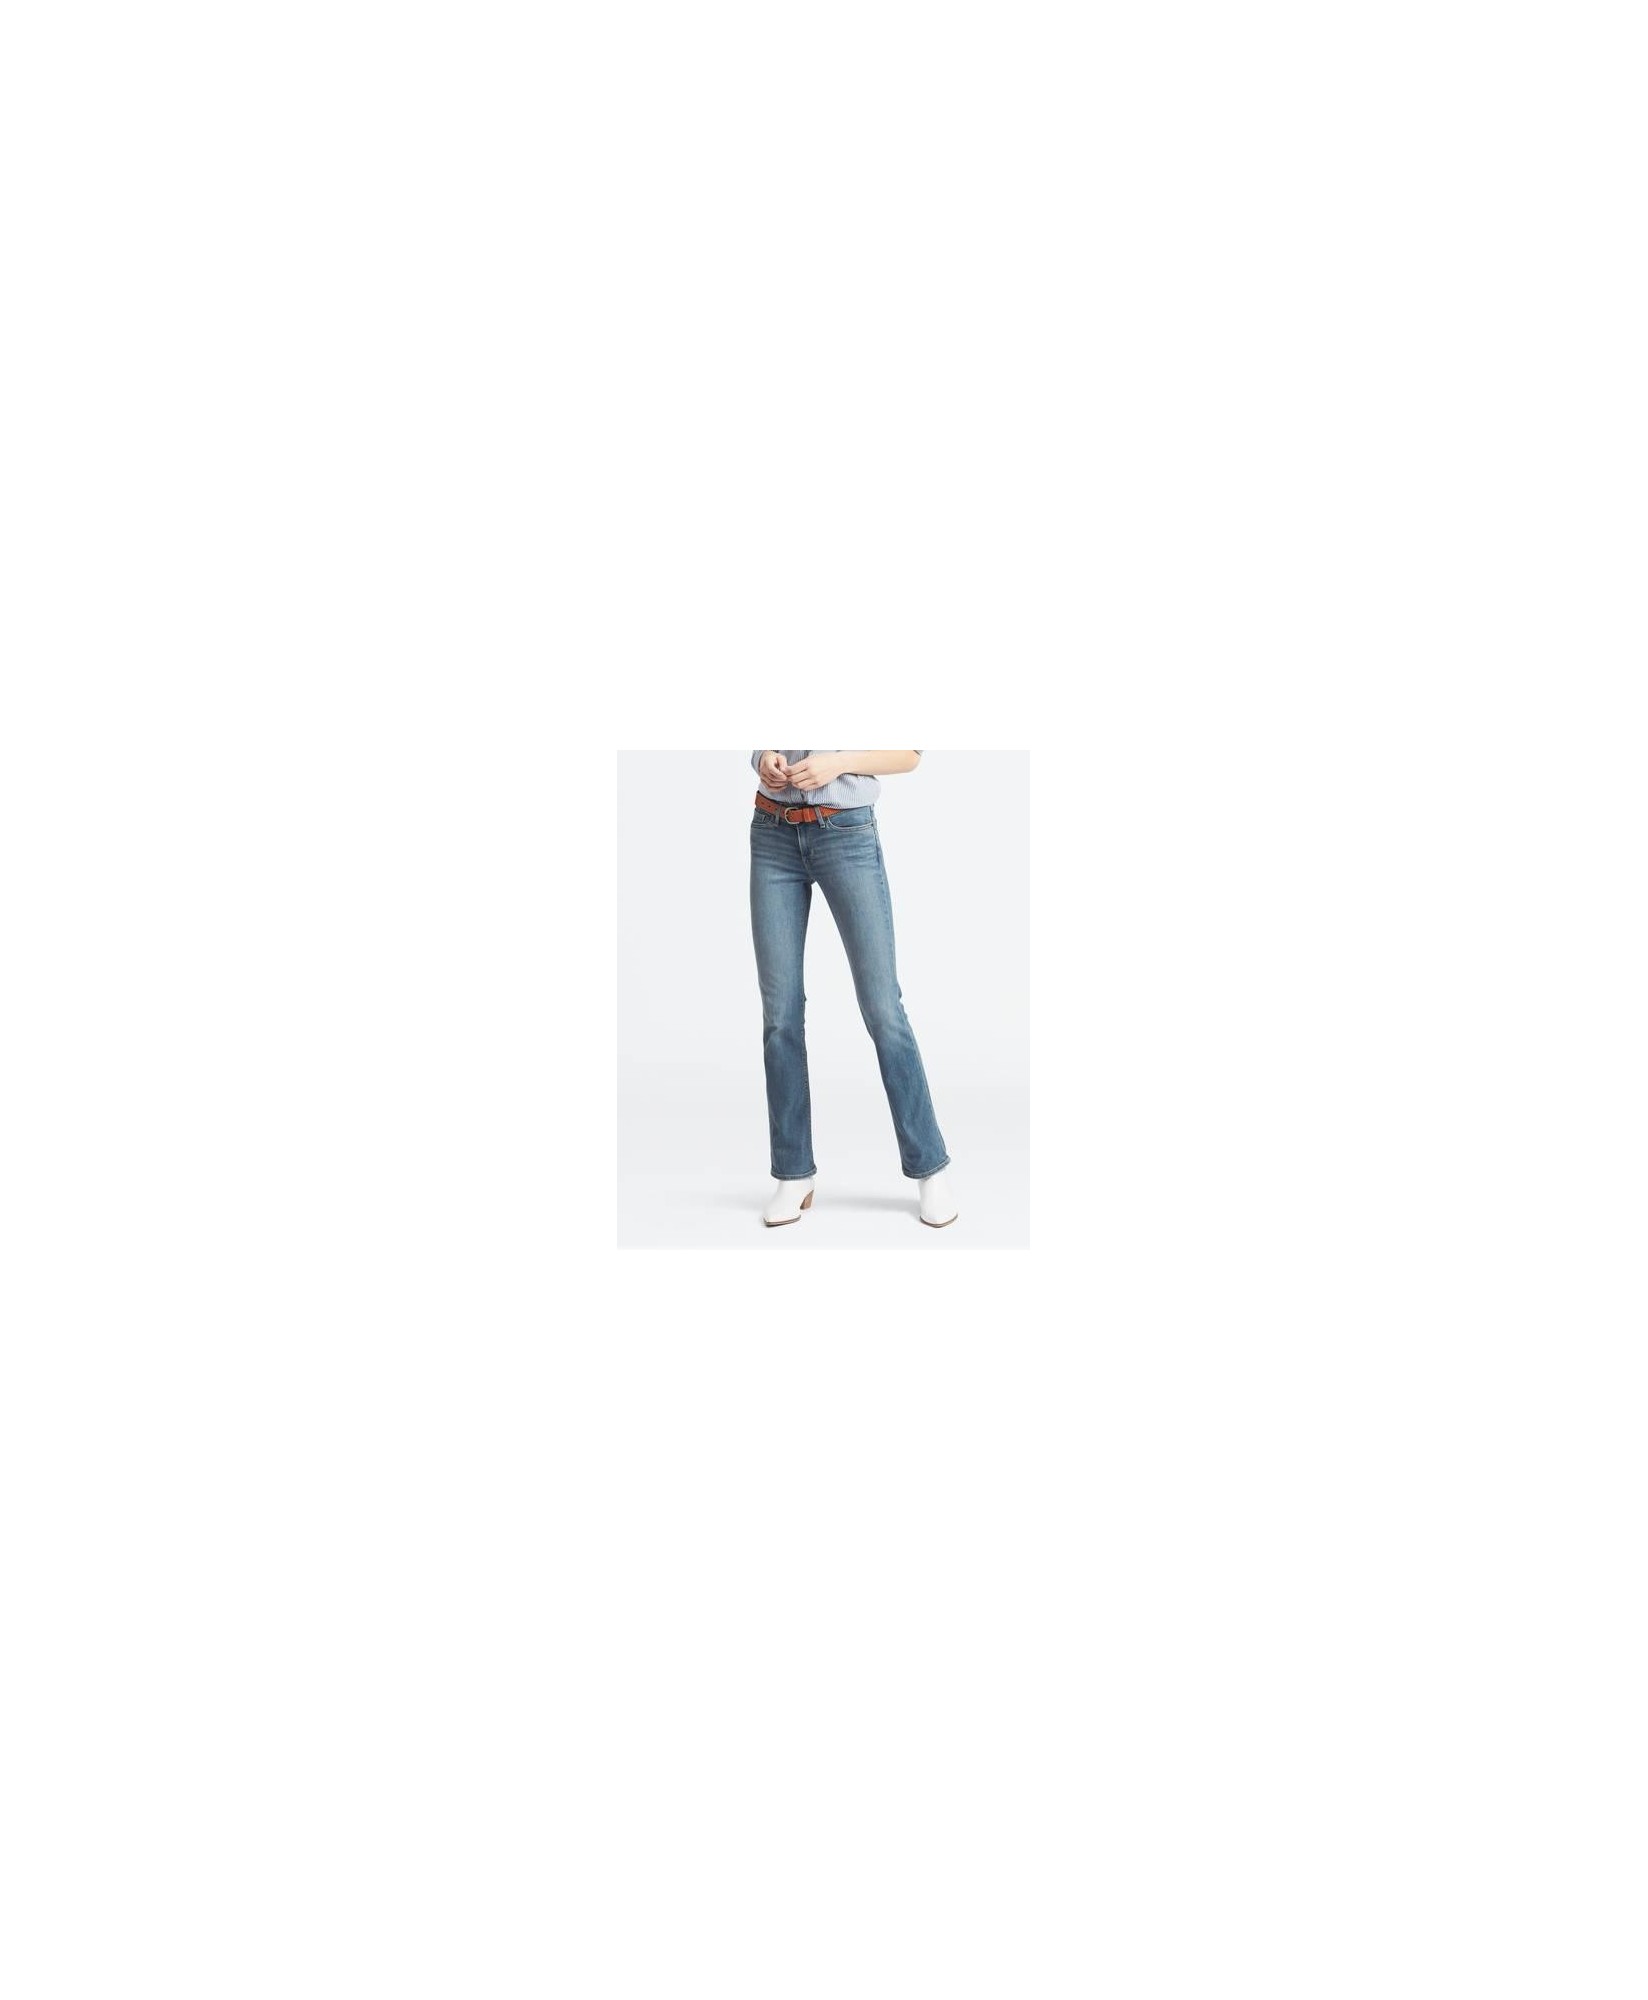 715 BOOTCUT JEANS